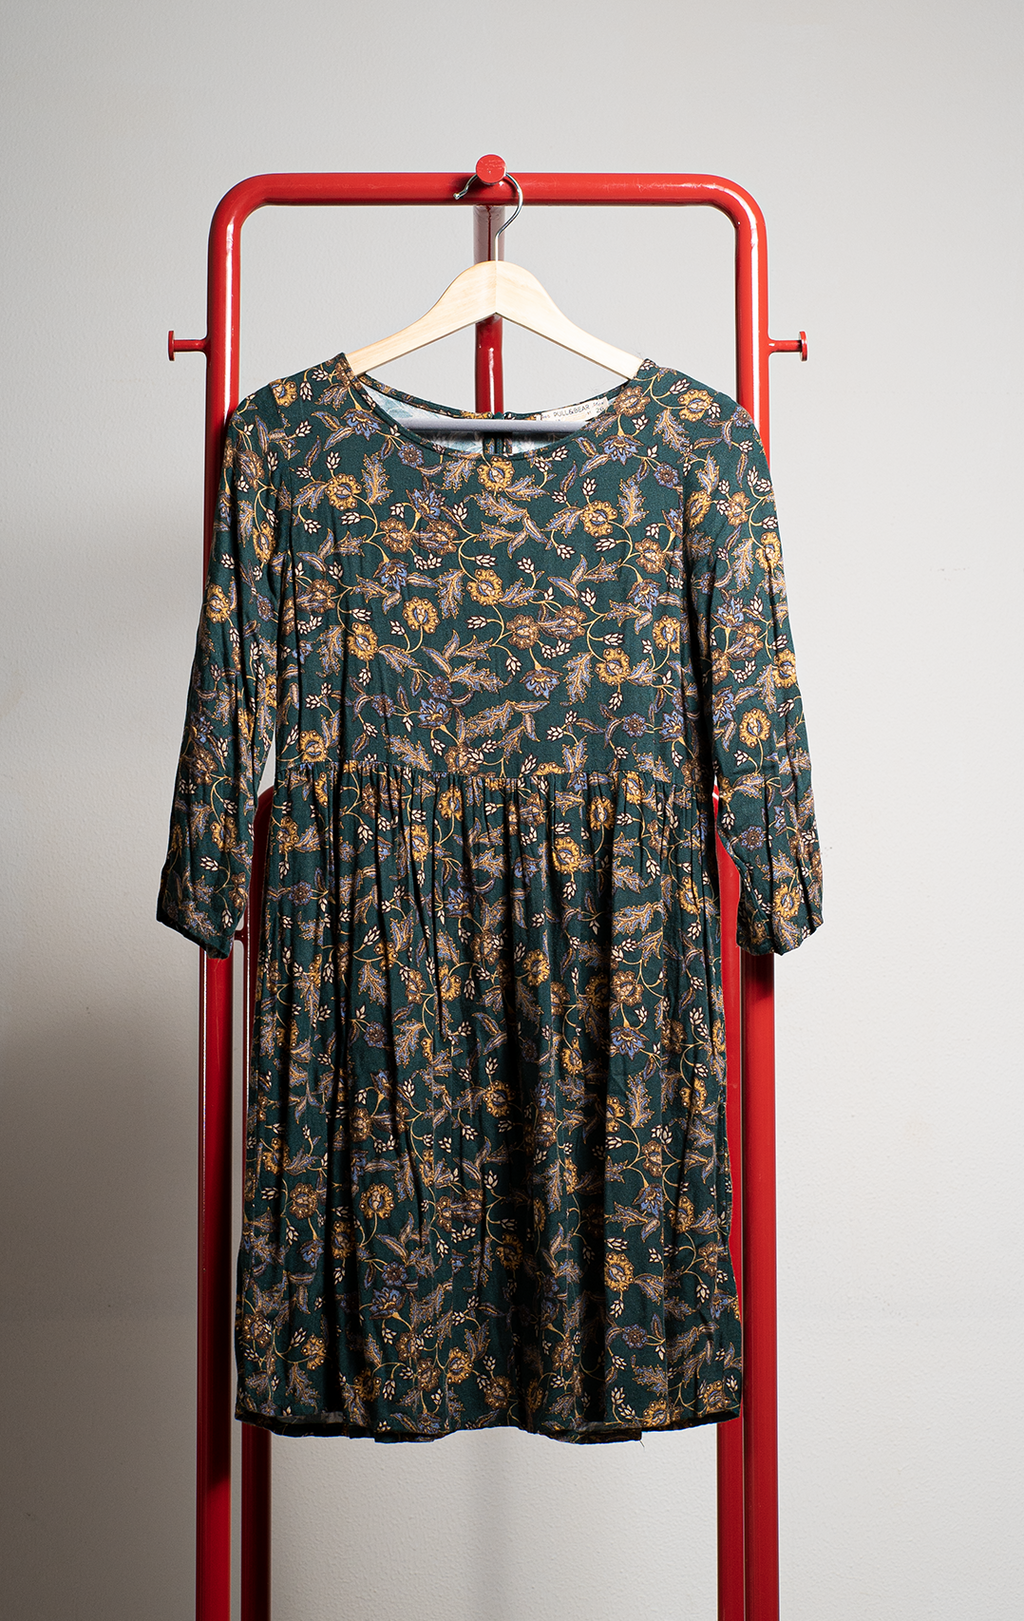 PULL & BEAR DRESS - Green with blue & yellow florals - Small